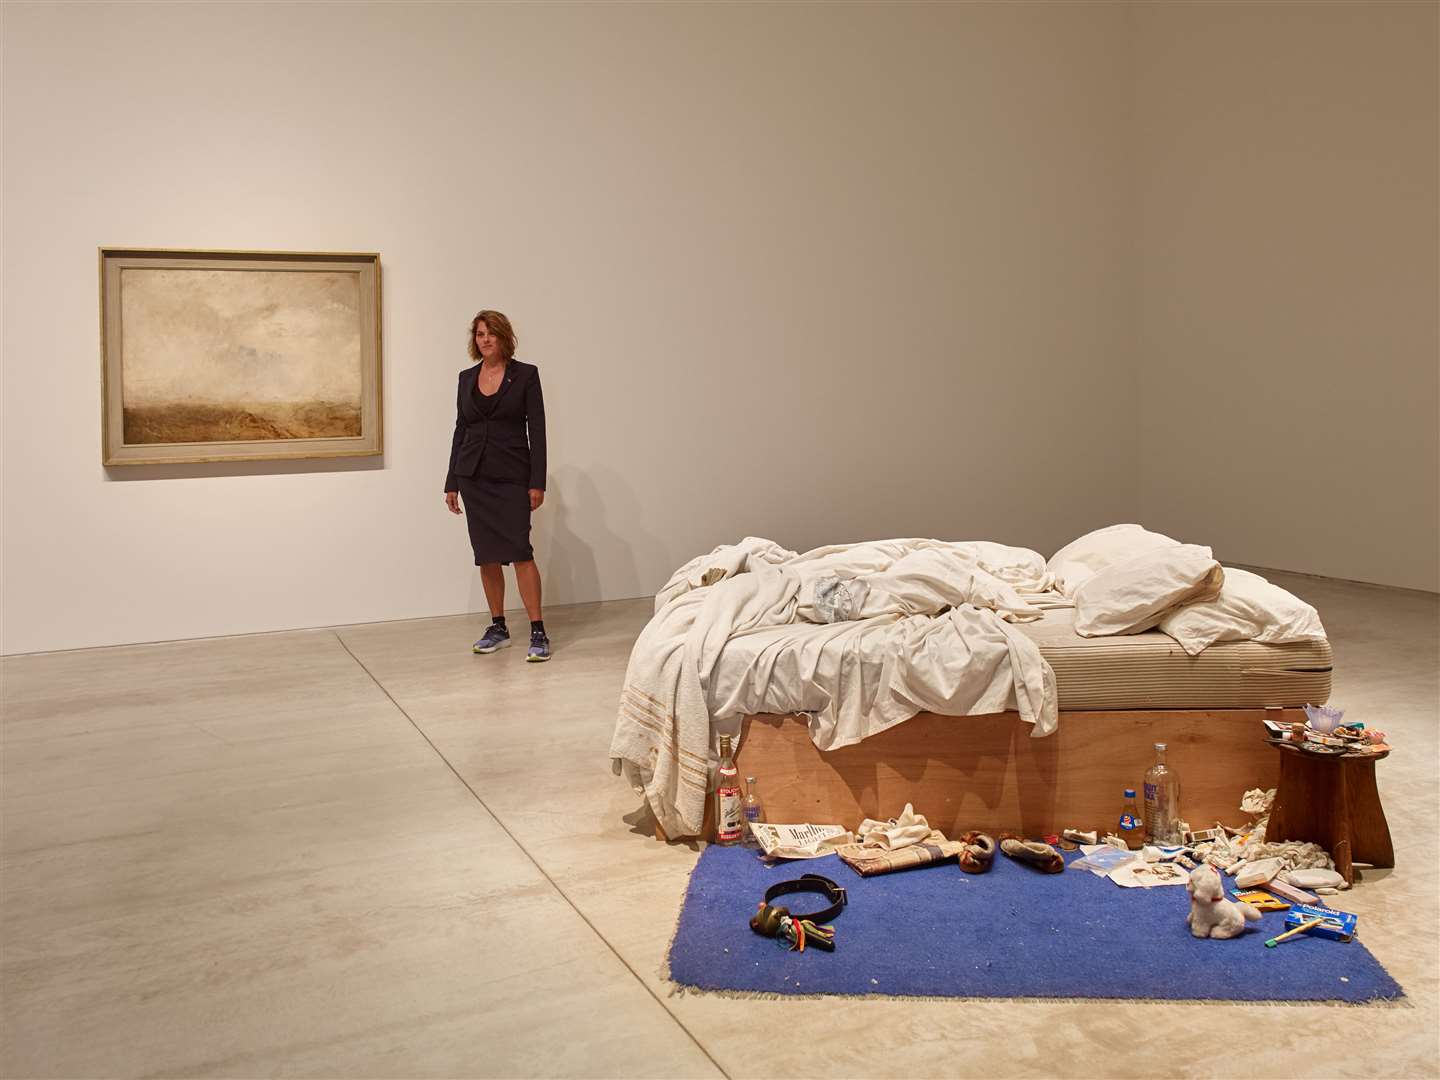 Artist Tracey Emin with her iconic My Bed at Turner Contemporary in 2017. Picture: Stephen White